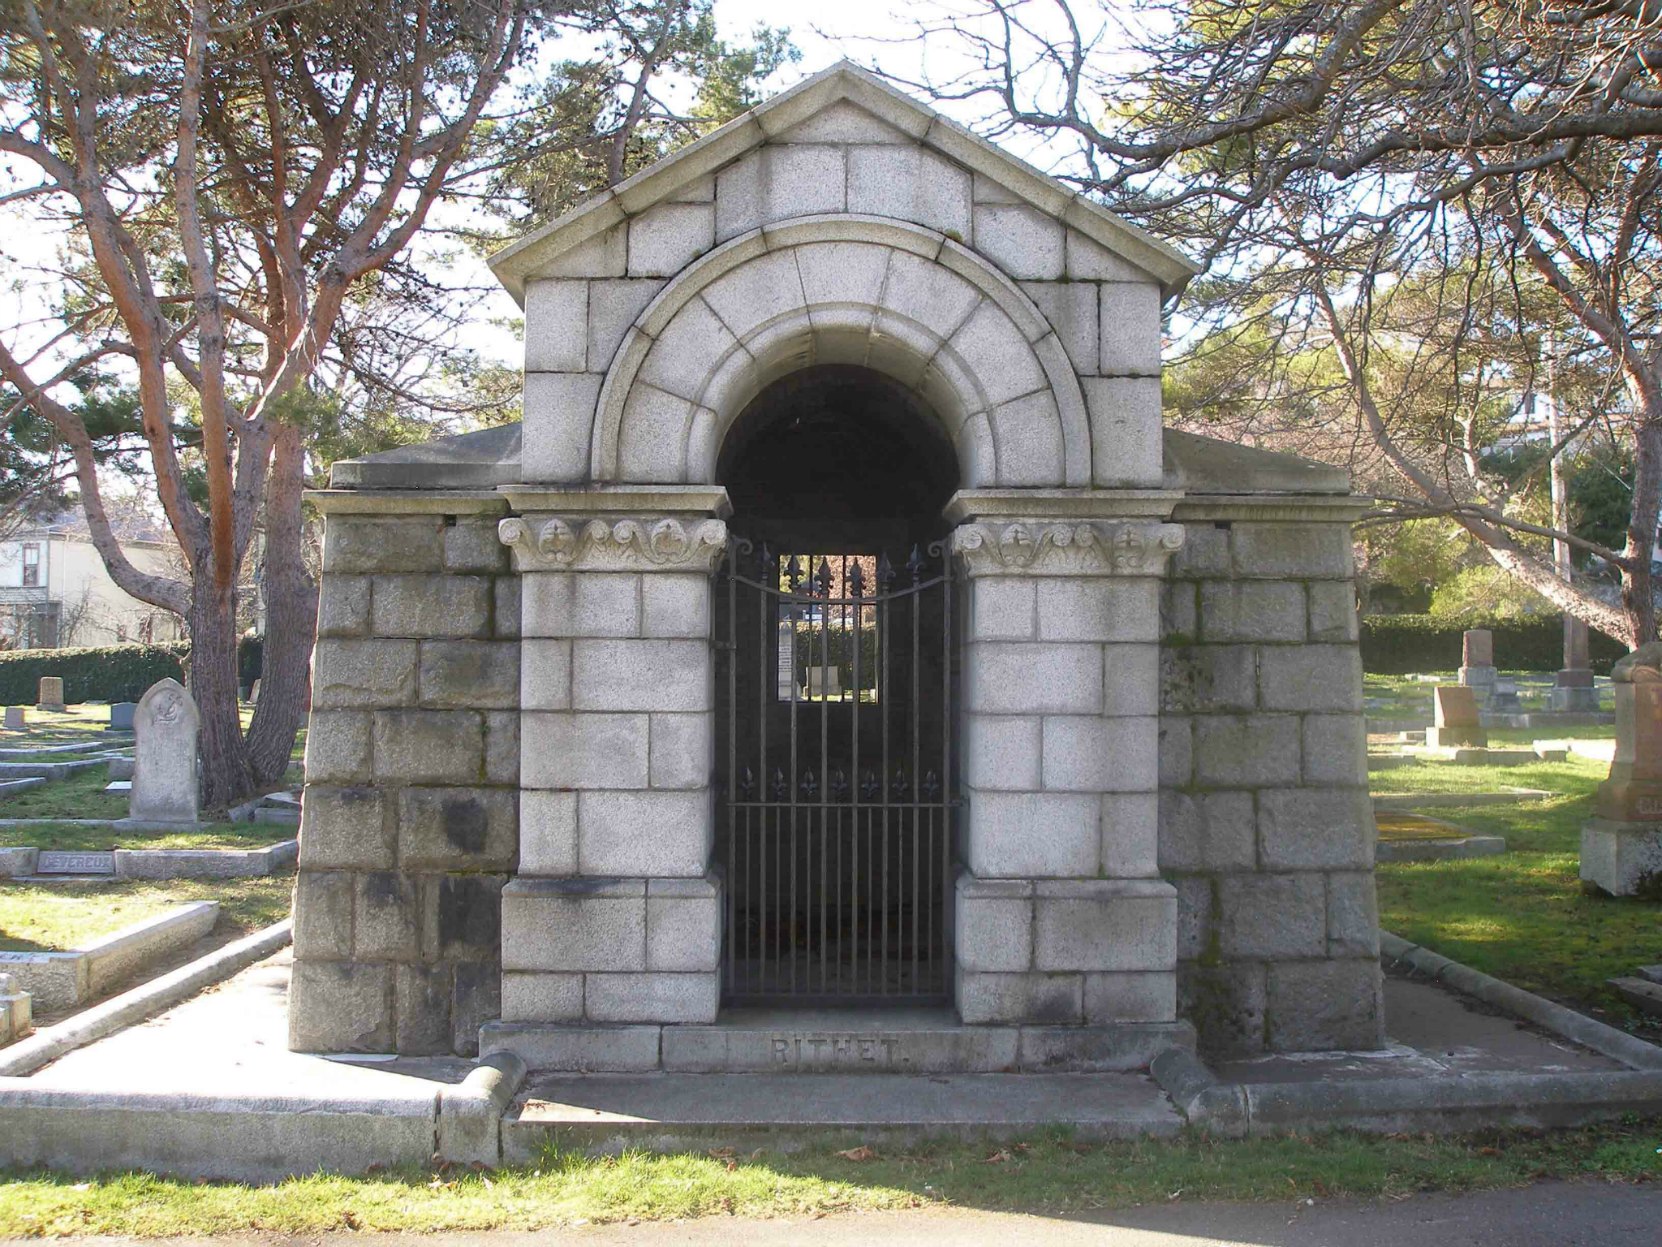 Robert Paterson Rithet is interred in the Rithet family mausoleum, Ross Bay Cemetery, Victoria, B.C.